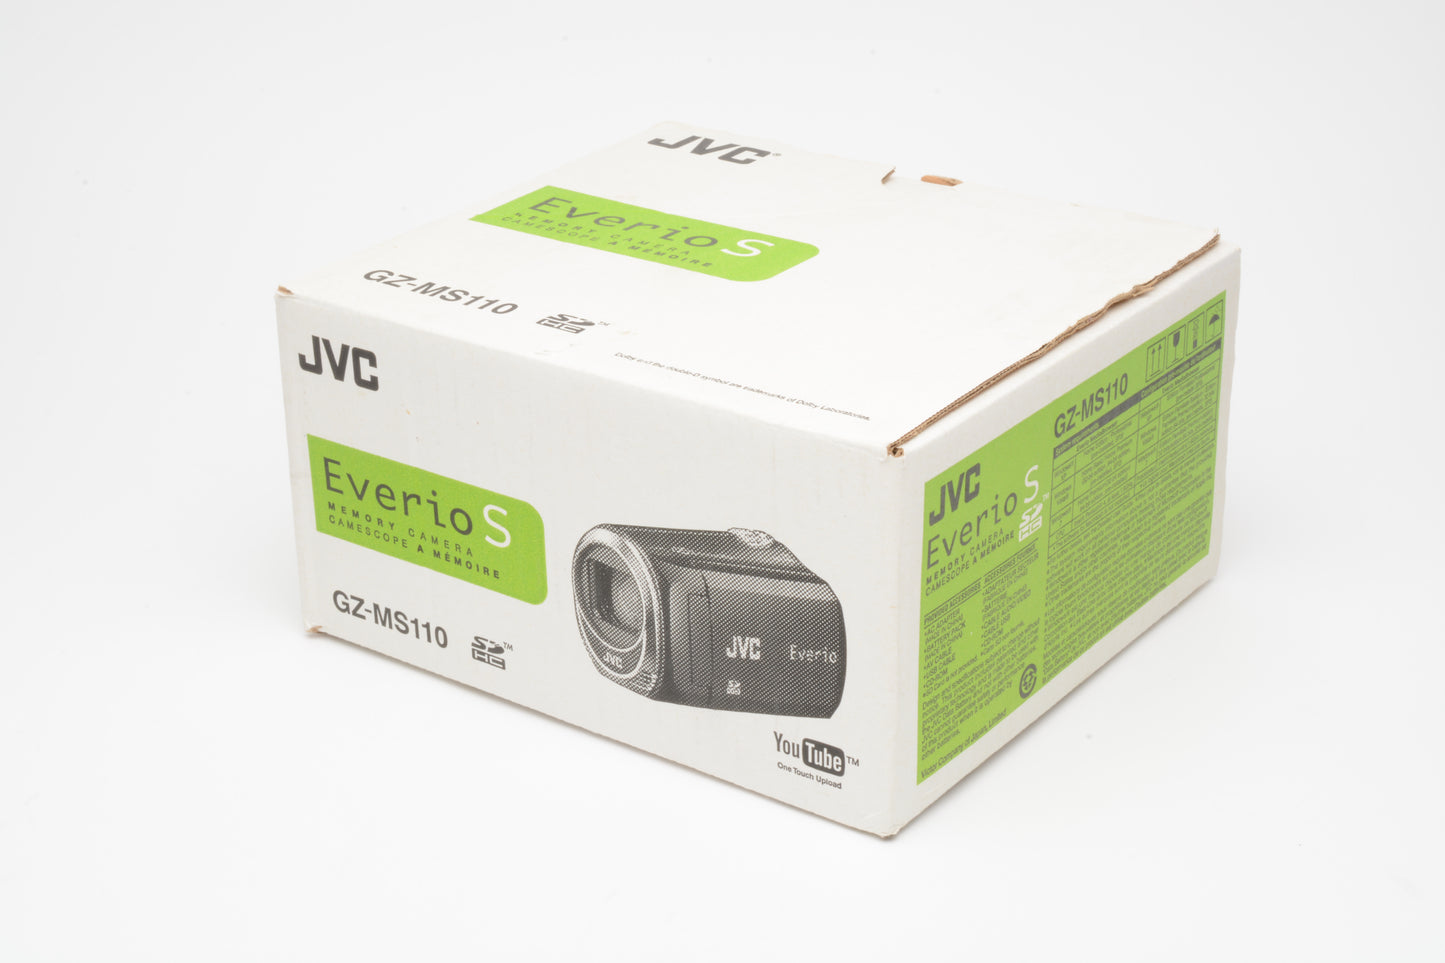 JVC Everio S GZ-MS110 SD card video camera, boxed, 16GB SD, cables, batt+AC, tested